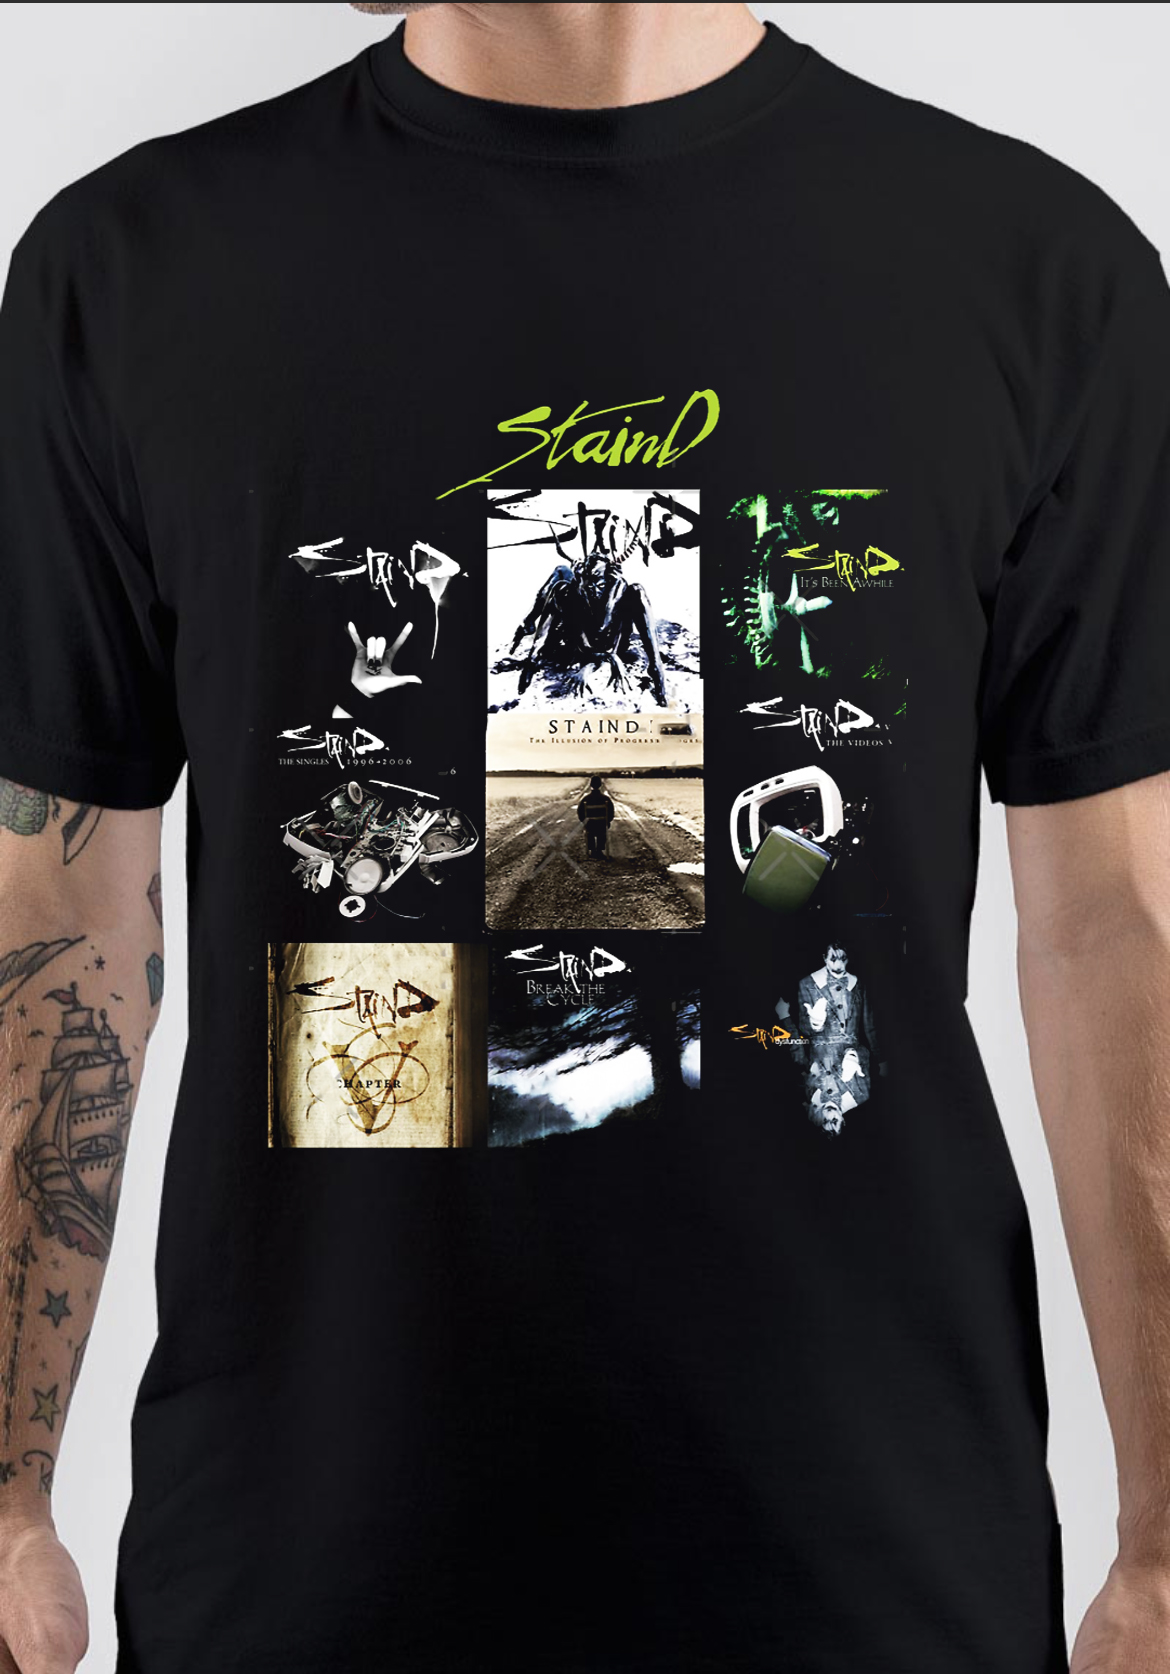 Staind T-Shirt And Merchandise